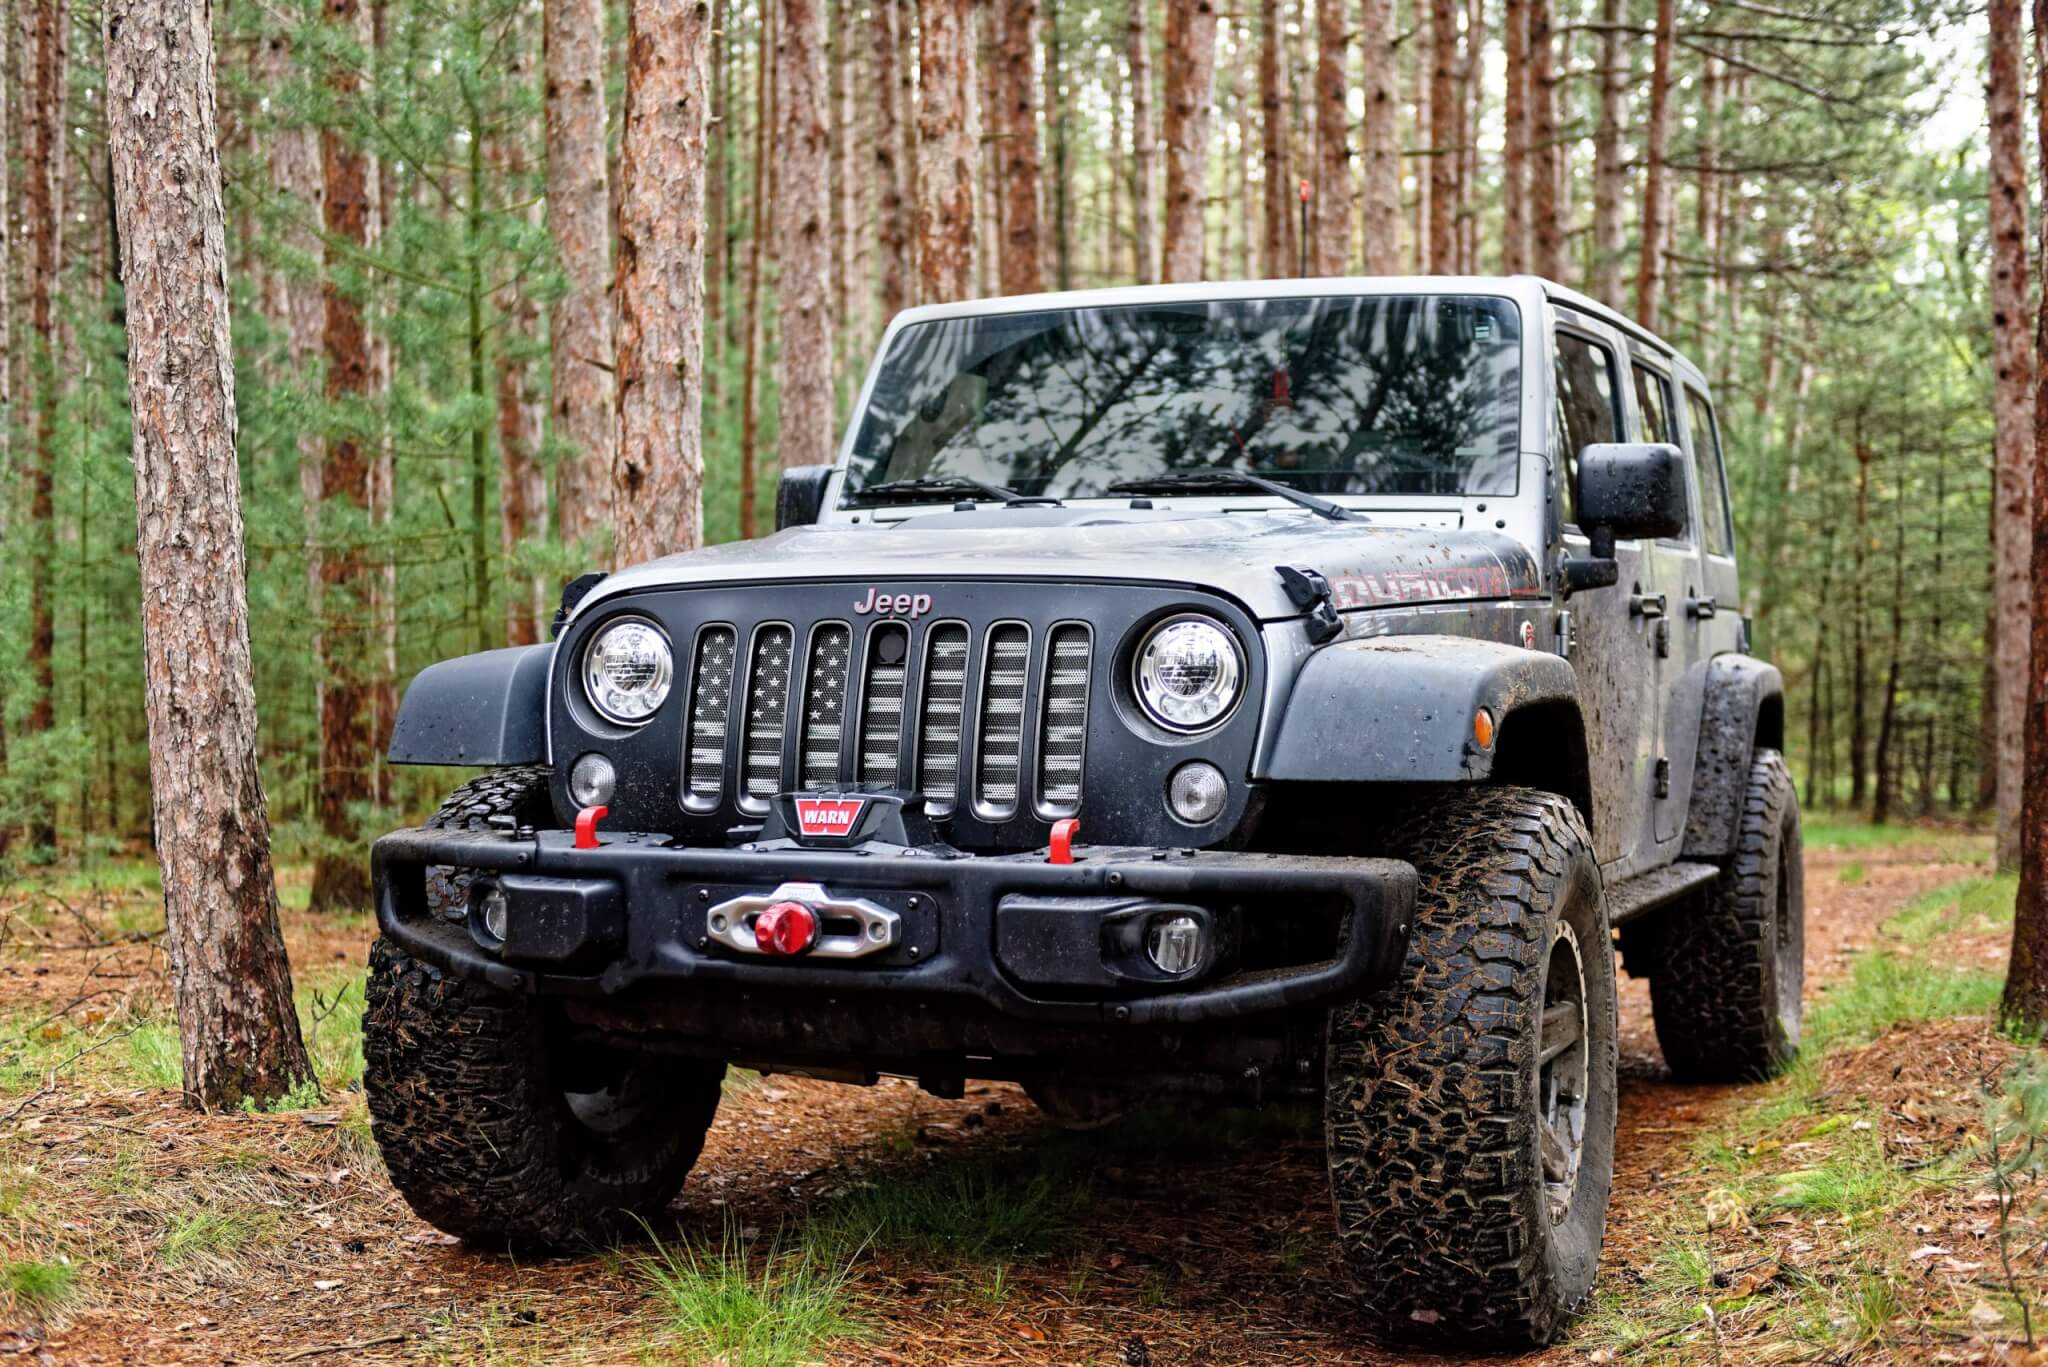 The Jeep Wrangler is the best Doomsday vehicle, according to experts.